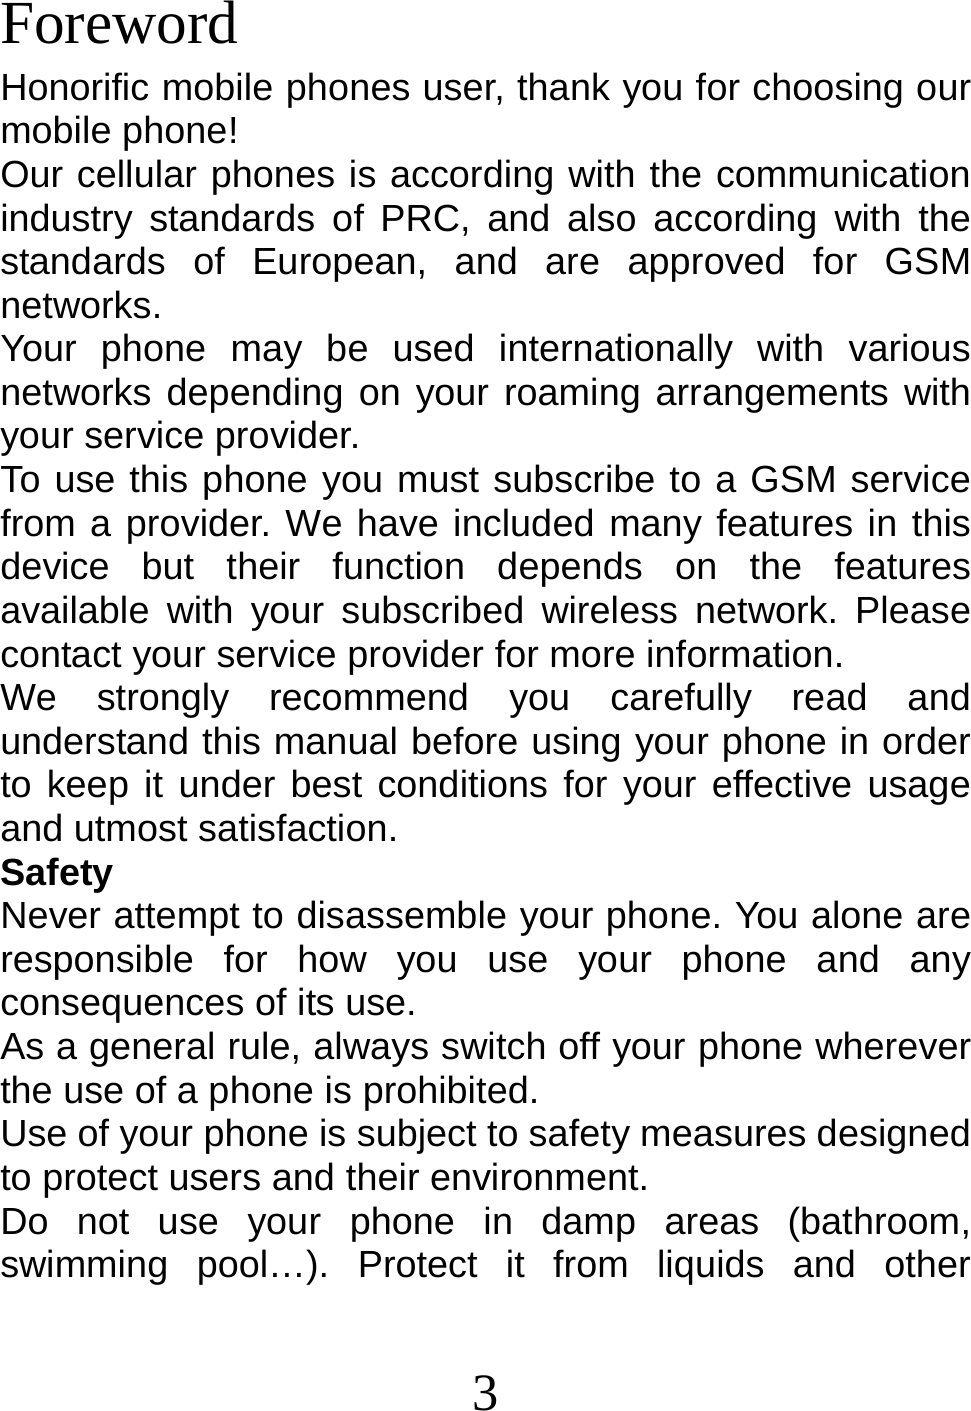 3   Foreword Honorific mobile phones user, thank you for choosing our mobile phone! Our cellular phones is according with the communication industry standards of PRC, and also according with the standards of European, and are approved for GSM networks. Your phone may be used internationally with various networks depending on your roaming arrangements with your service provider. To use this phone you must subscribe to a GSM service from a provider. We have included many features in this device but their function depends on the features available with your subscribed wireless network. Please contact your service provider for more information. We strongly recommend you carefully read and understand this manual before using your phone in order to keep it under best conditions for your effective usage and utmost satisfaction. Safety Never attempt to disassemble your phone. You alone are responsible for how you use your phone and any consequences of its use. As a general rule, always switch off your phone wherever the use of a phone is prohibited. Use of your phone is subject to safety measures designed to protect users and their environment. Do not use your phone in damp areas (bathroom, swimming pool…). Protect it from liquids and other 